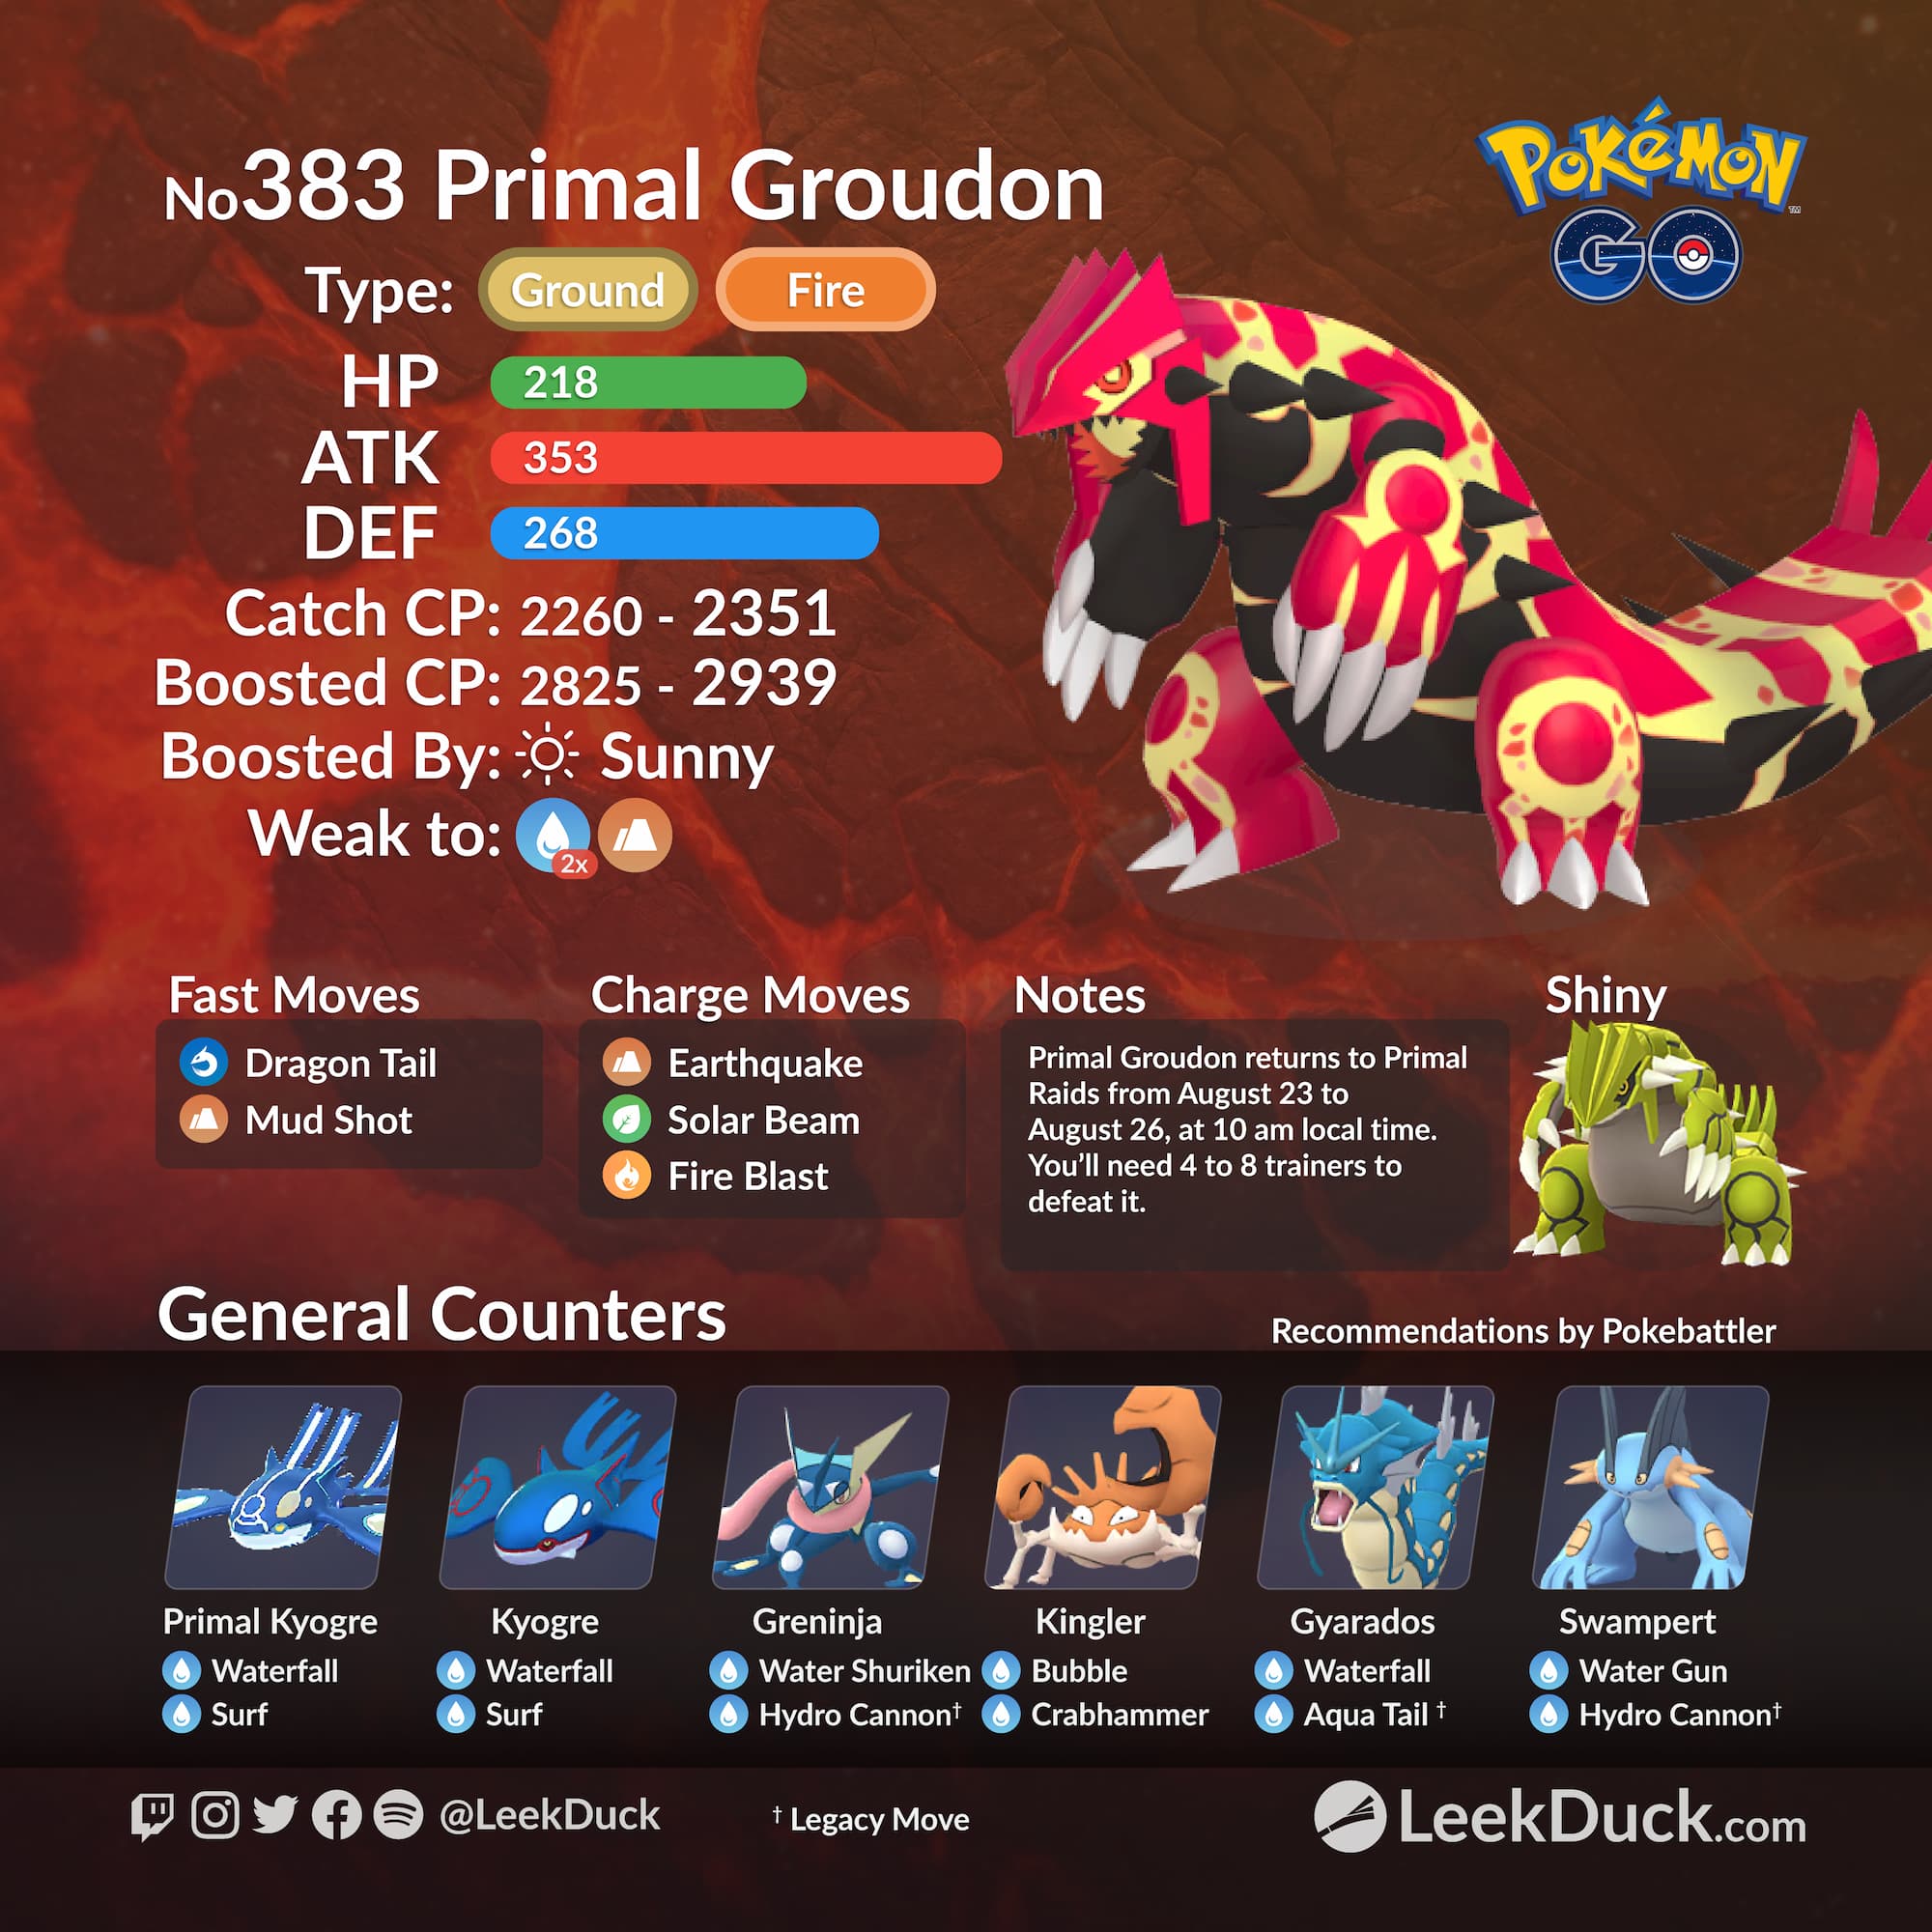 Pokémon GO Hub - Primal Groudon is back in raids, and is part of a special  Thursday night raid hour!